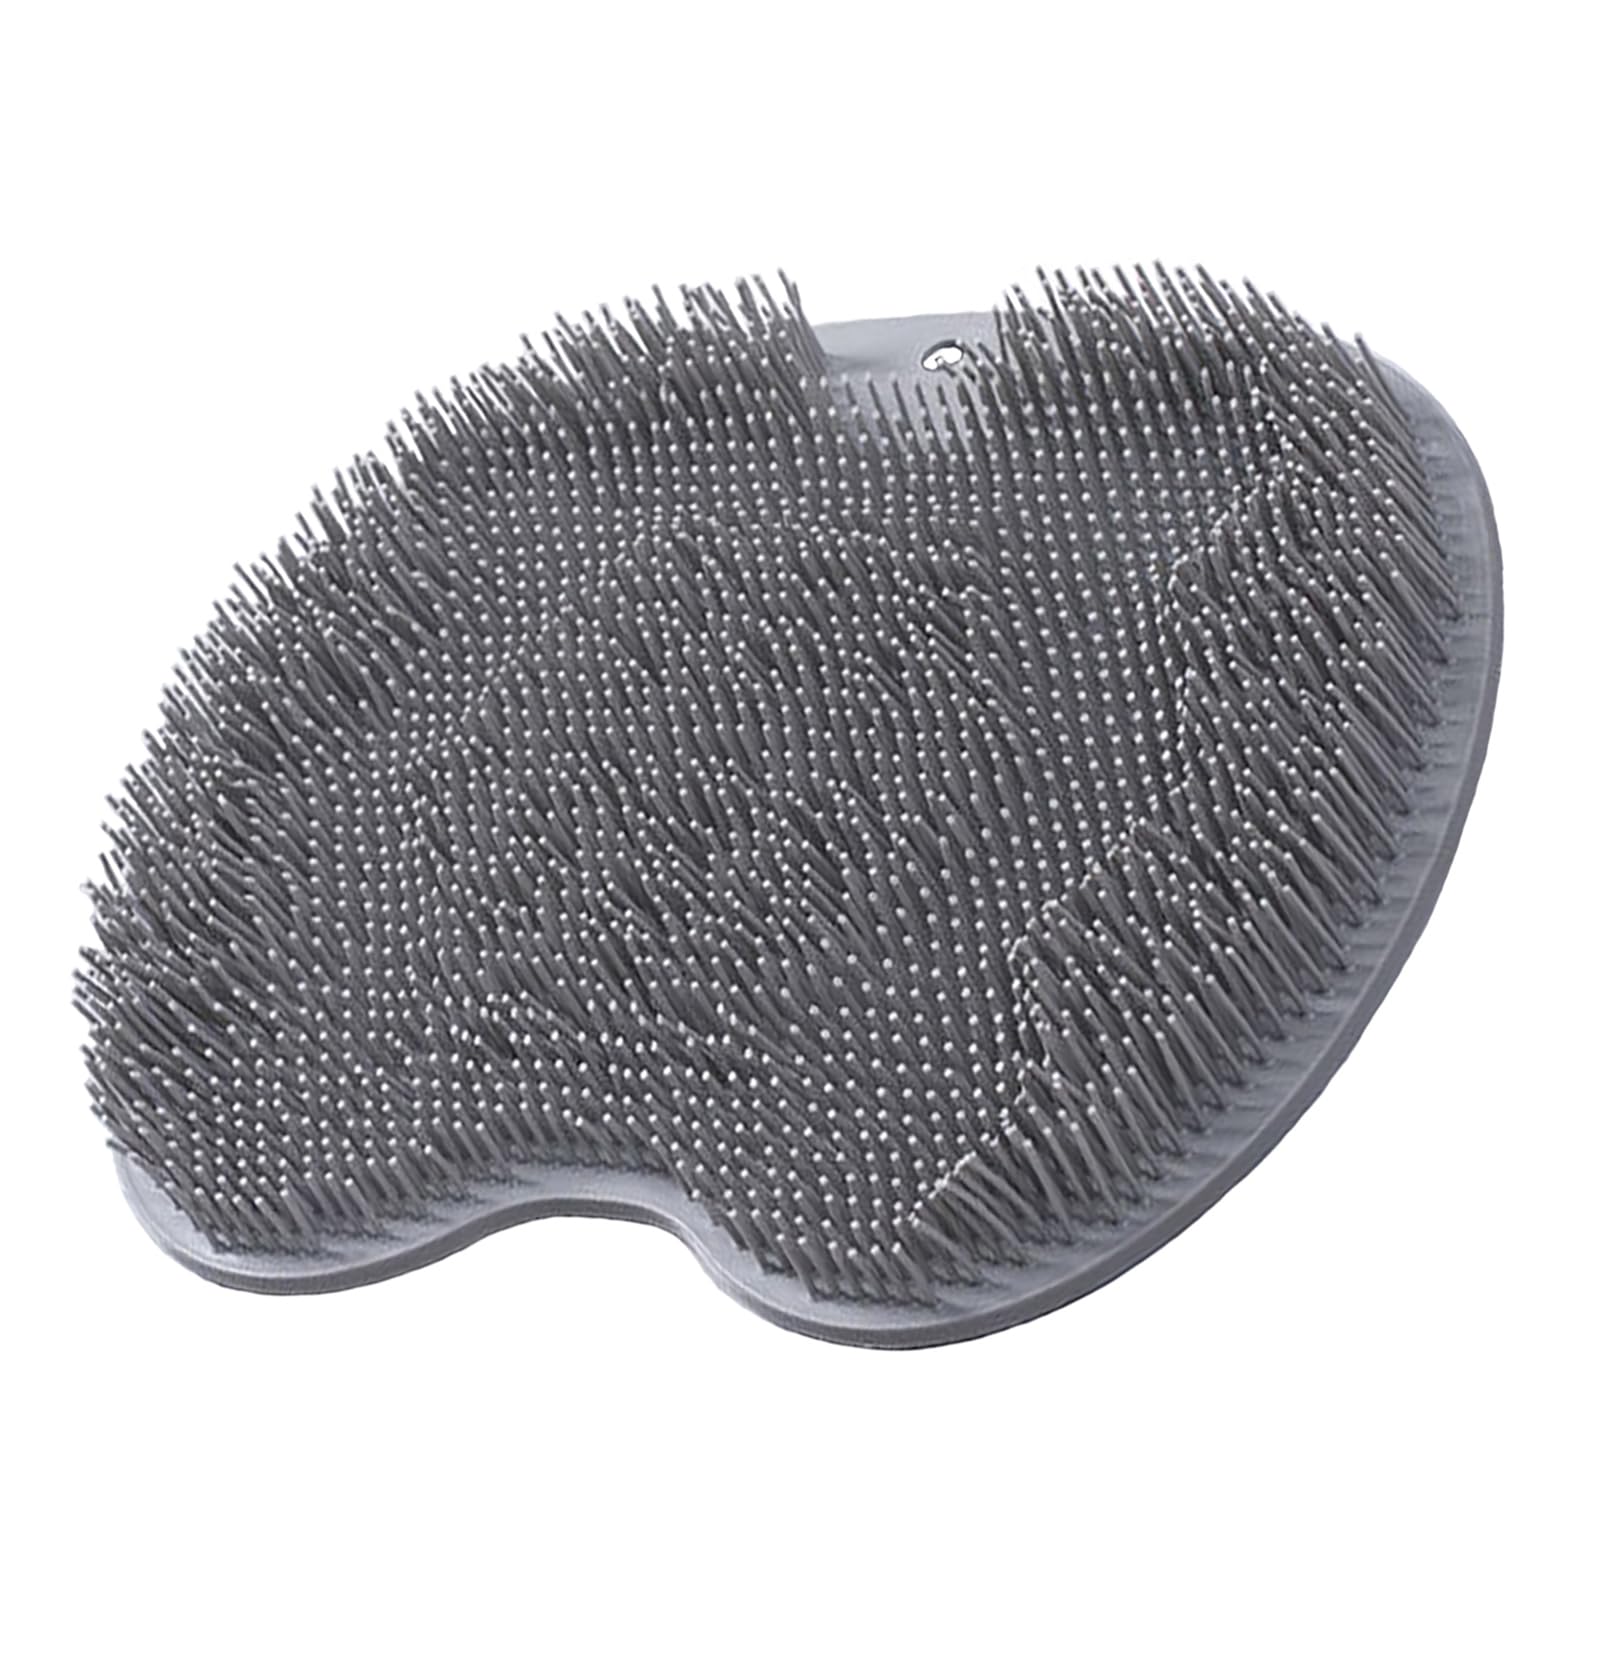 QIYIFAN Silicone Shower Foot Scrubber Mat Back Washer Exfoliating Bath Wash Pad Wall Mounted Non-Slip Suction Cups for Use in Cleaner Men and Women Grey